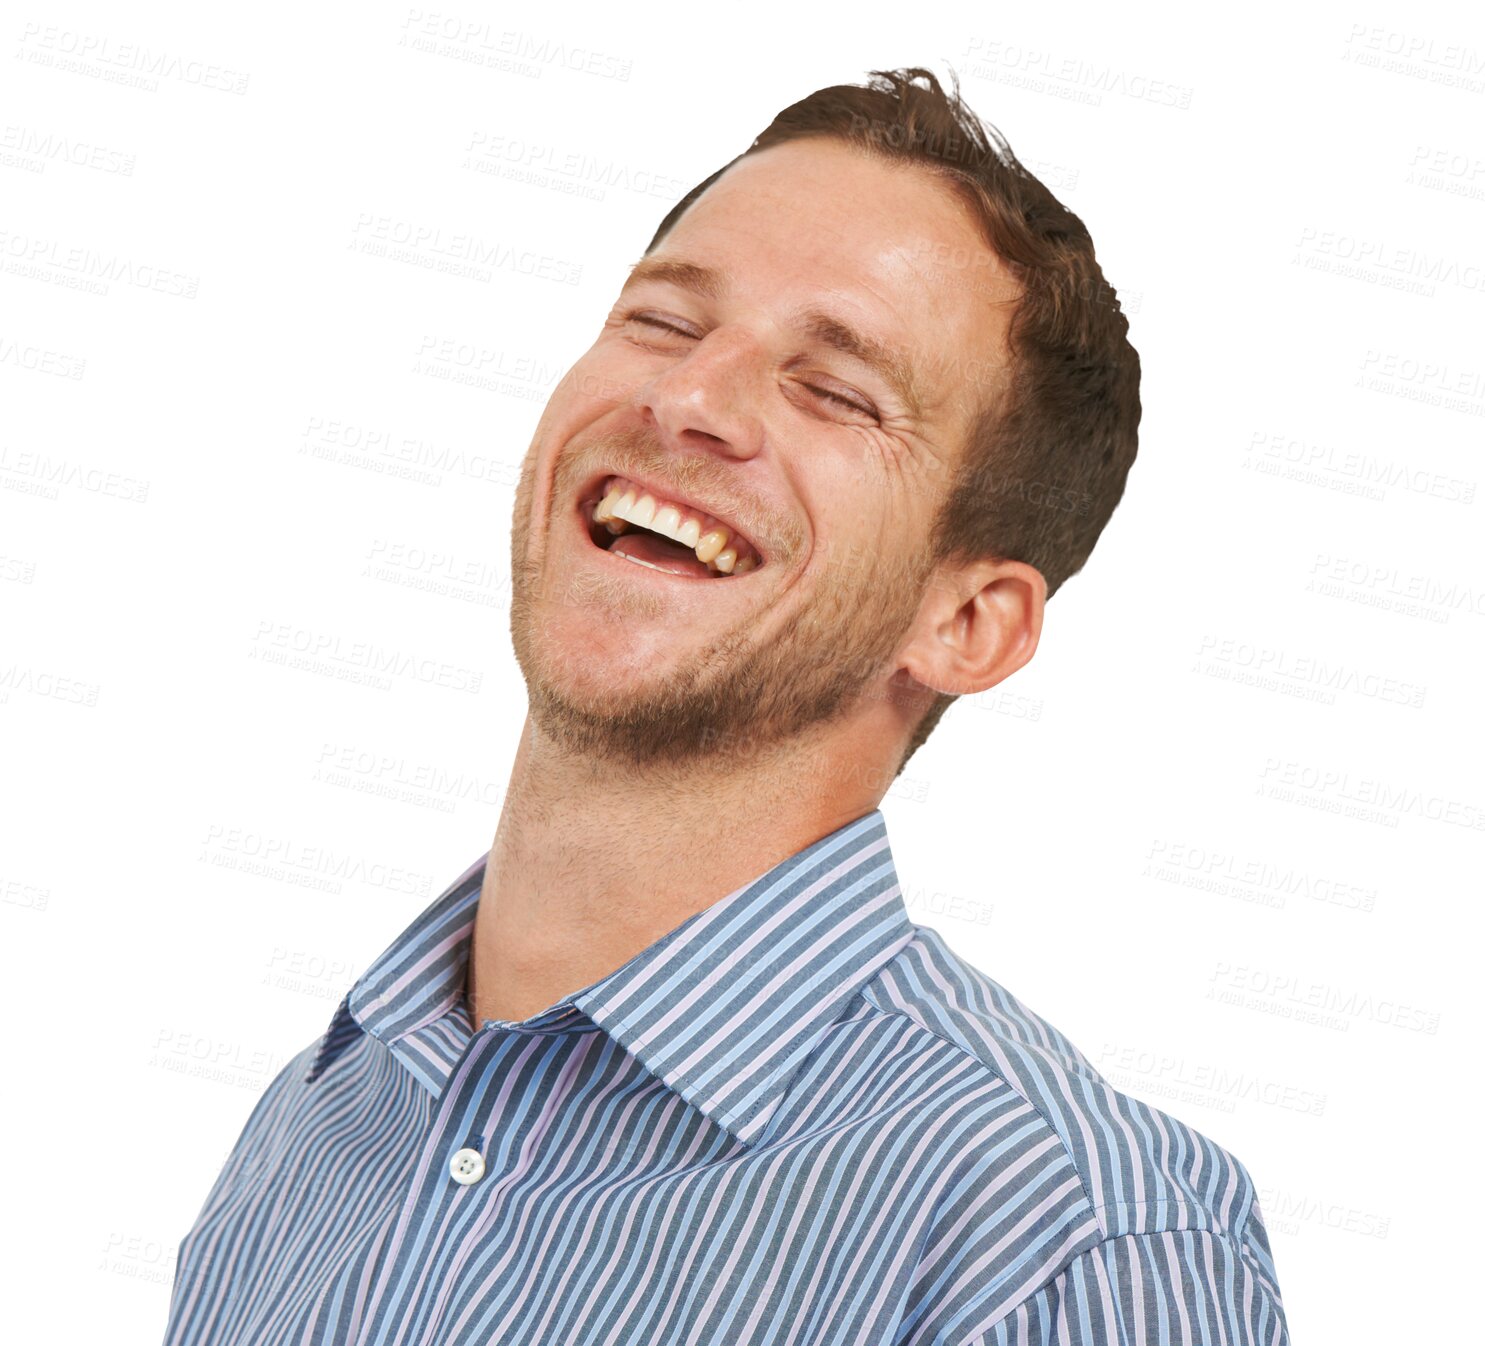 Buy stock photo Laughing, happy and a man with confidence for work isolated on a transparent png background. Smile, funny and a confident corporate employee or businessman with a laugh for a joke or happiness